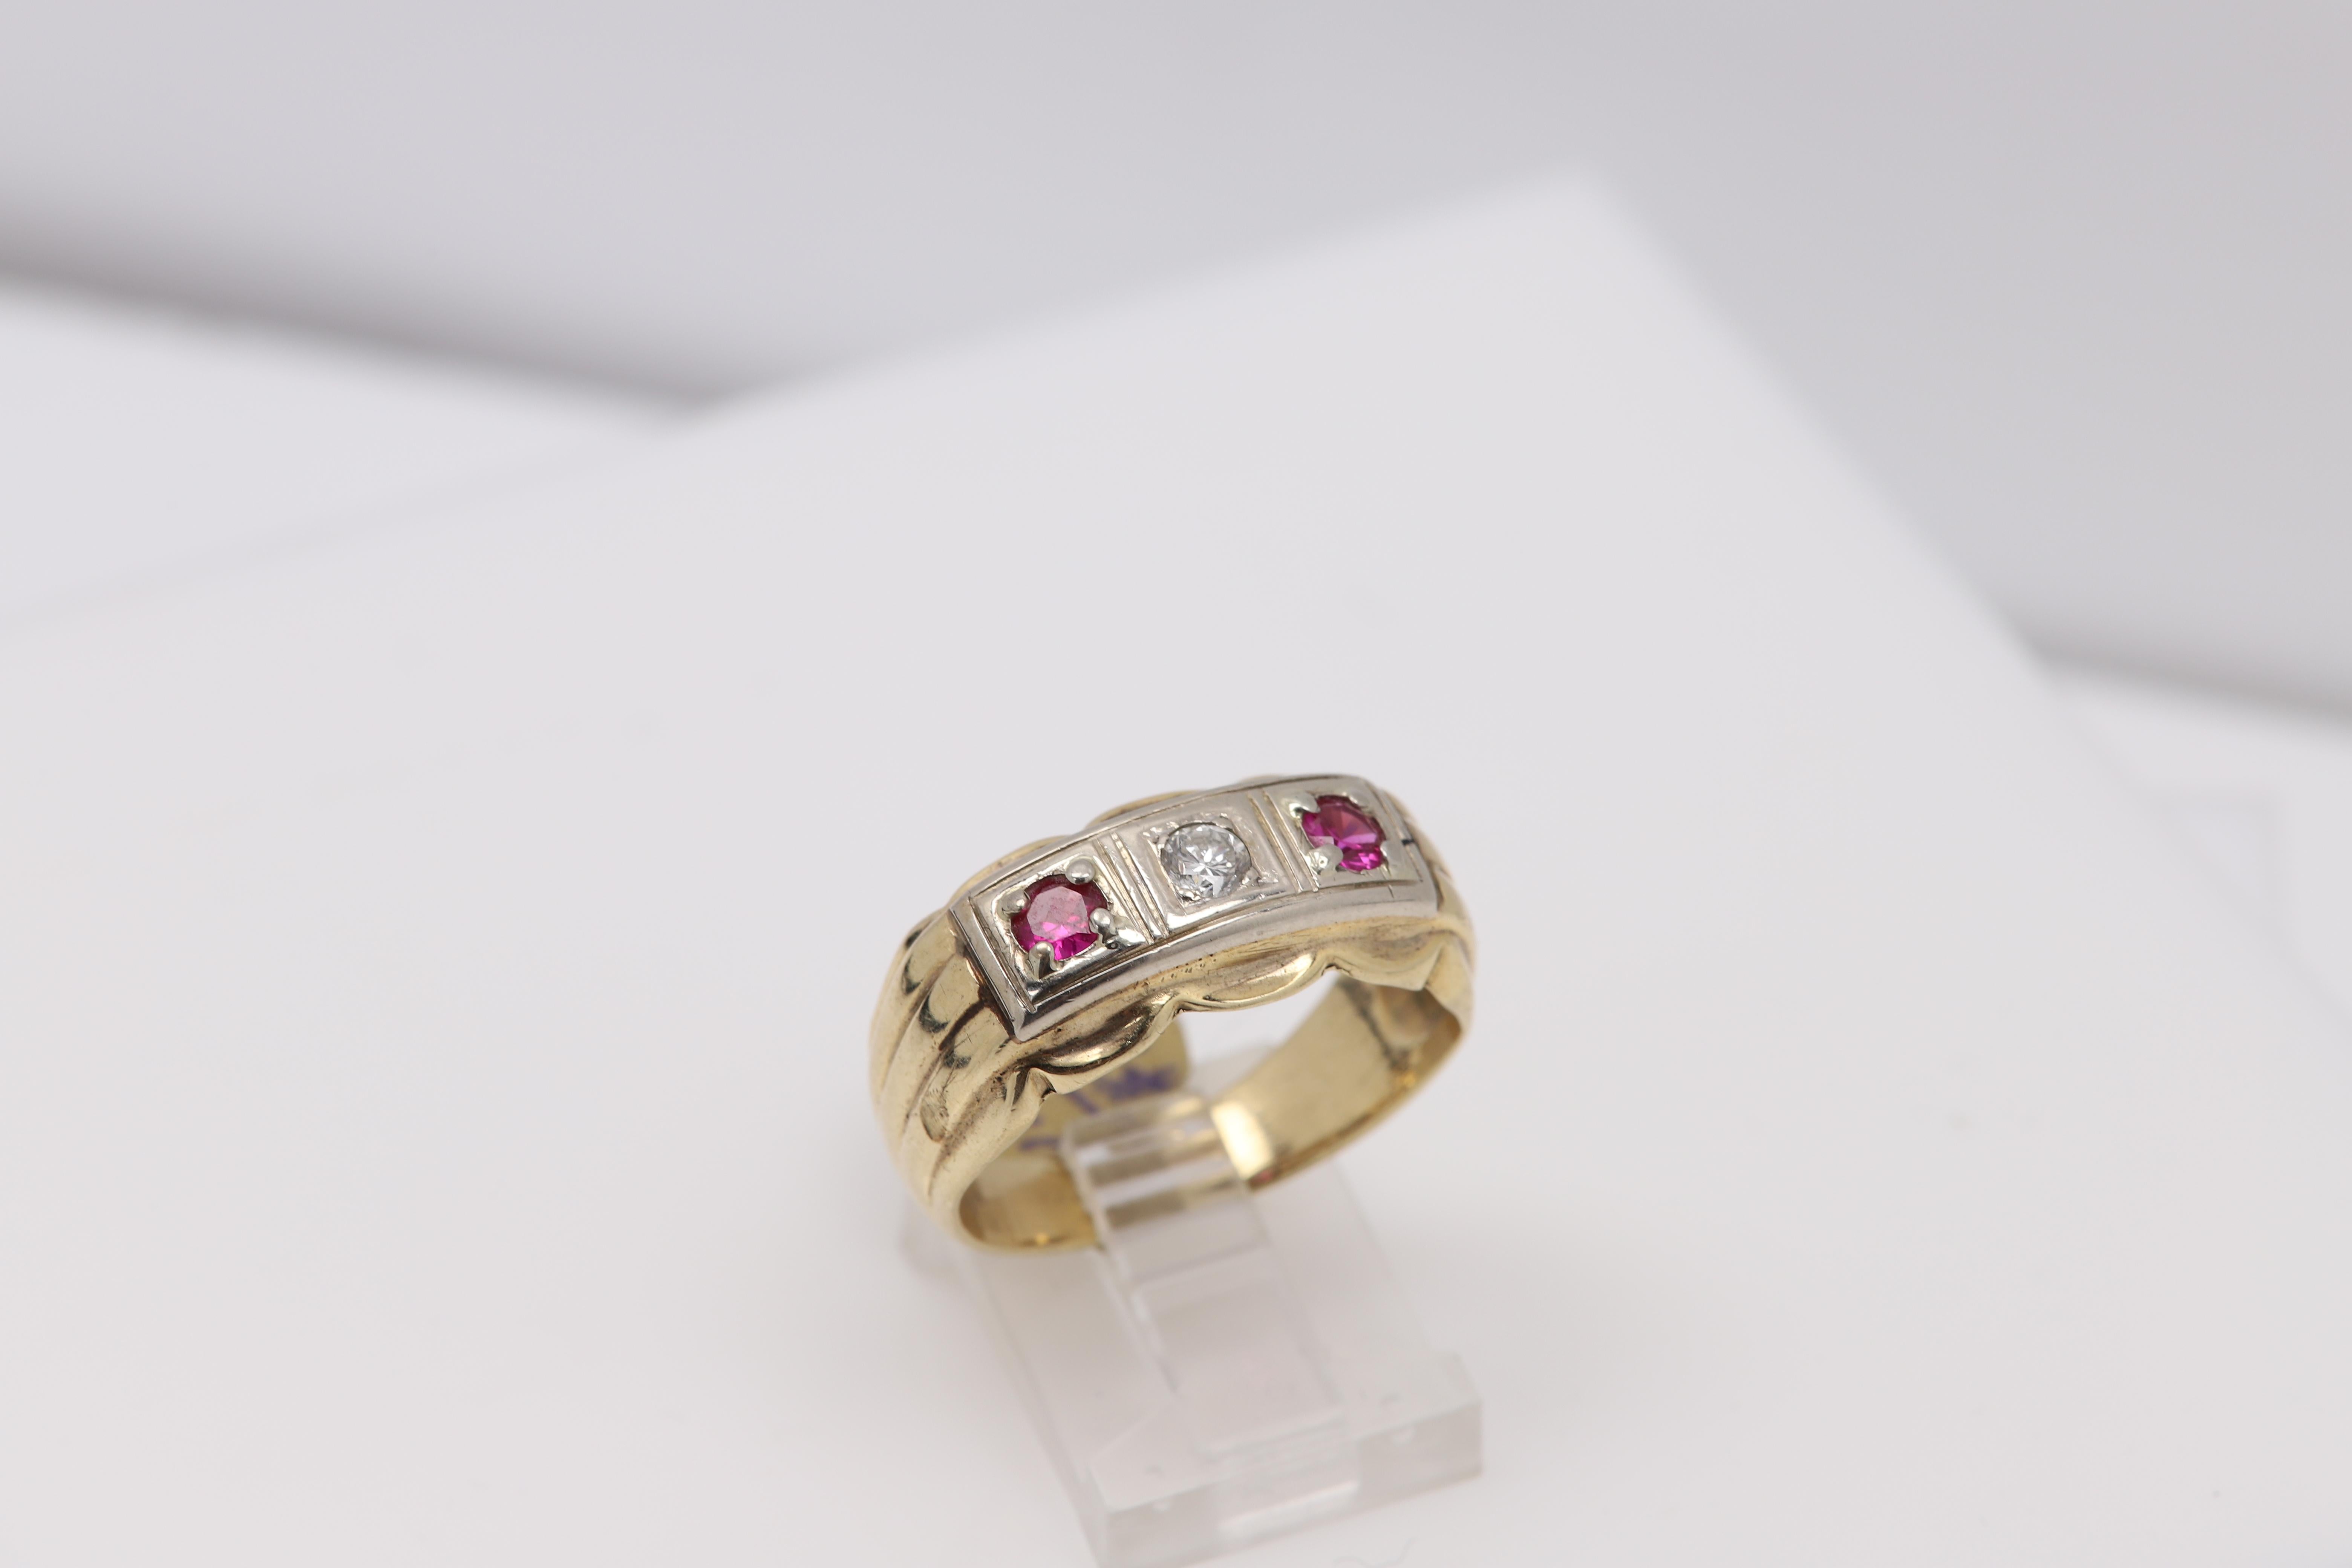 Vintage Men's 3 Stone Ring 14 Karat Yellow White Gold Ruby Diamond circa 1940's In Fair Condition For Sale In Brooklyn, NY